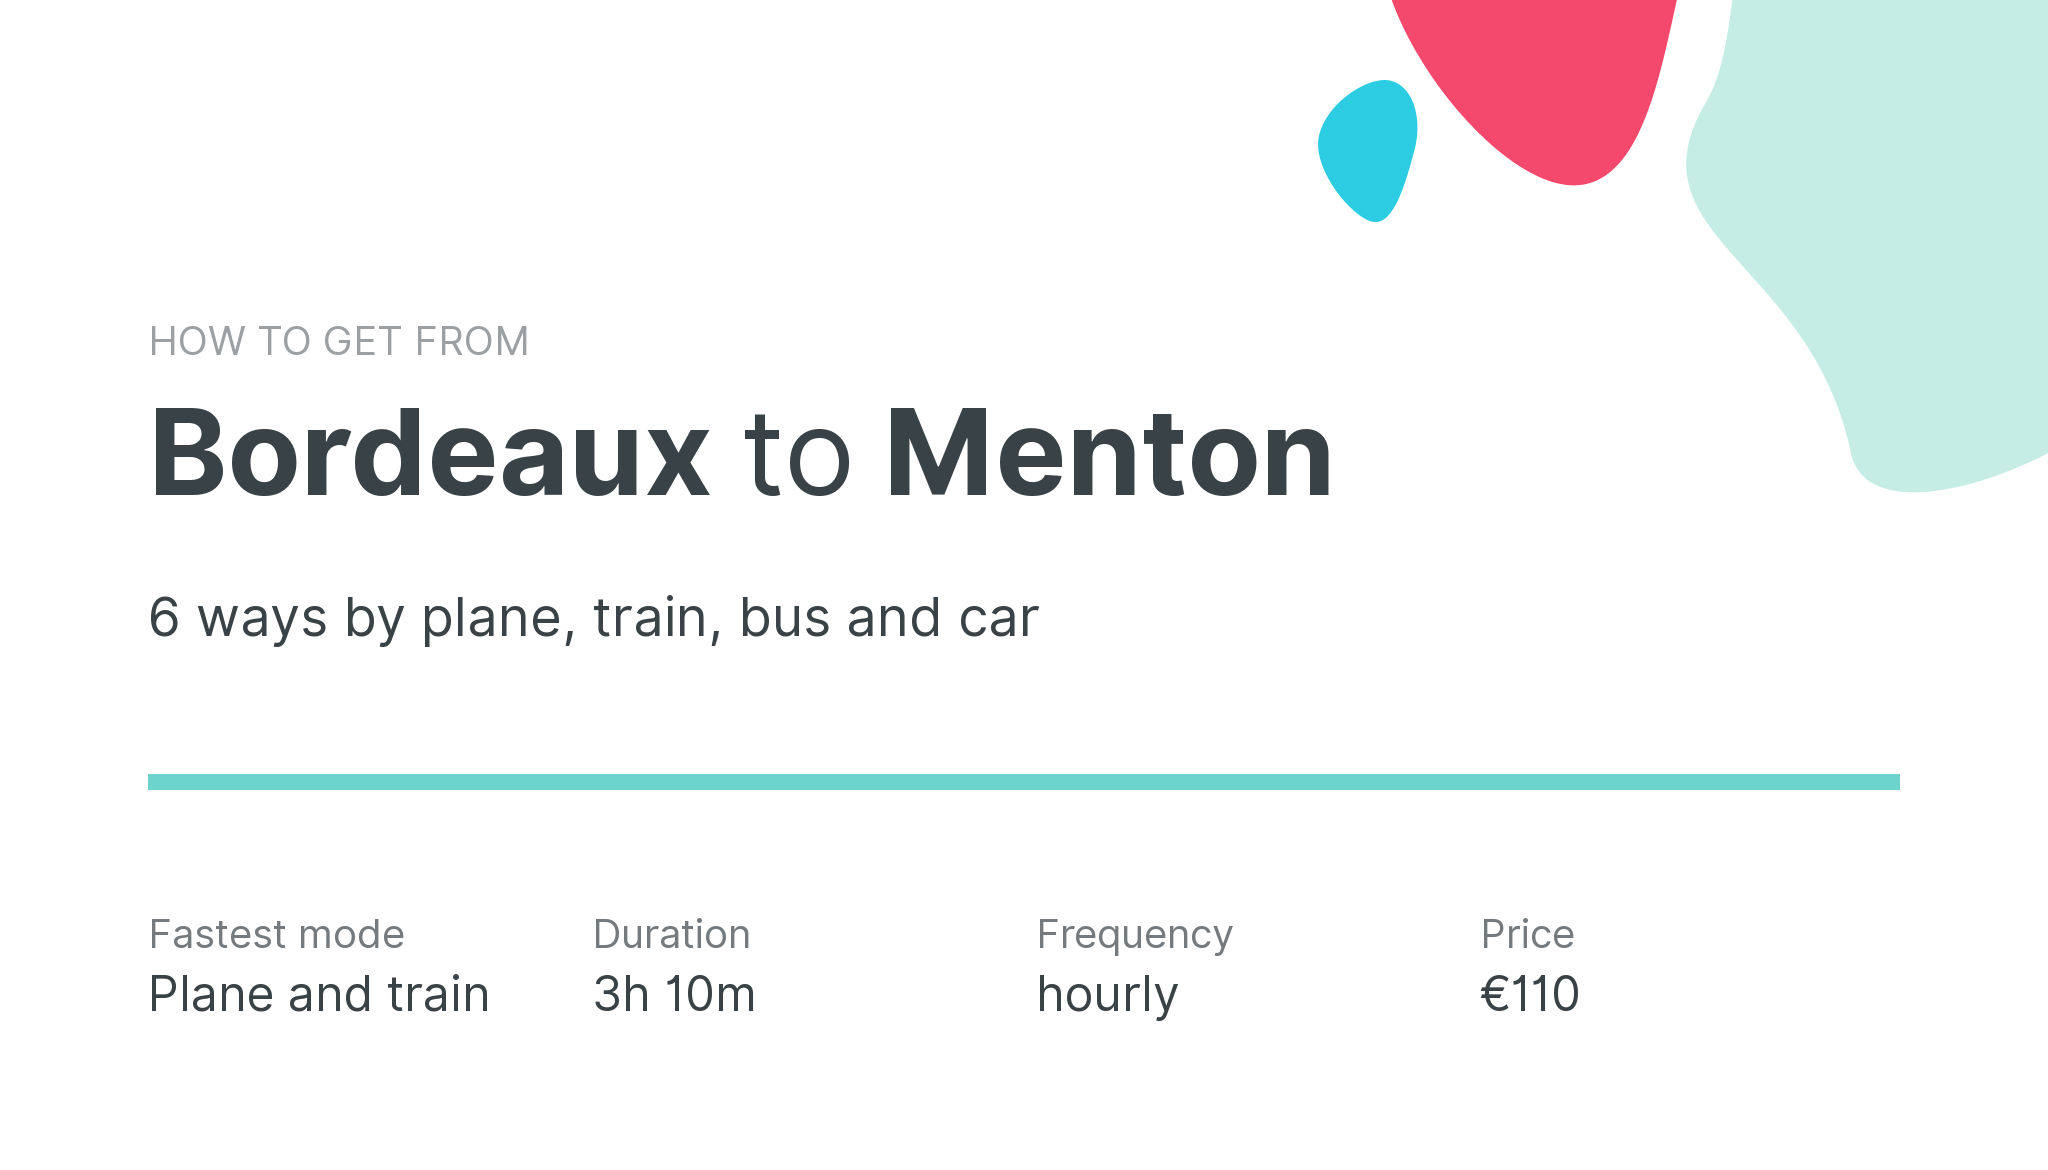 How do I get from Bordeaux to Menton